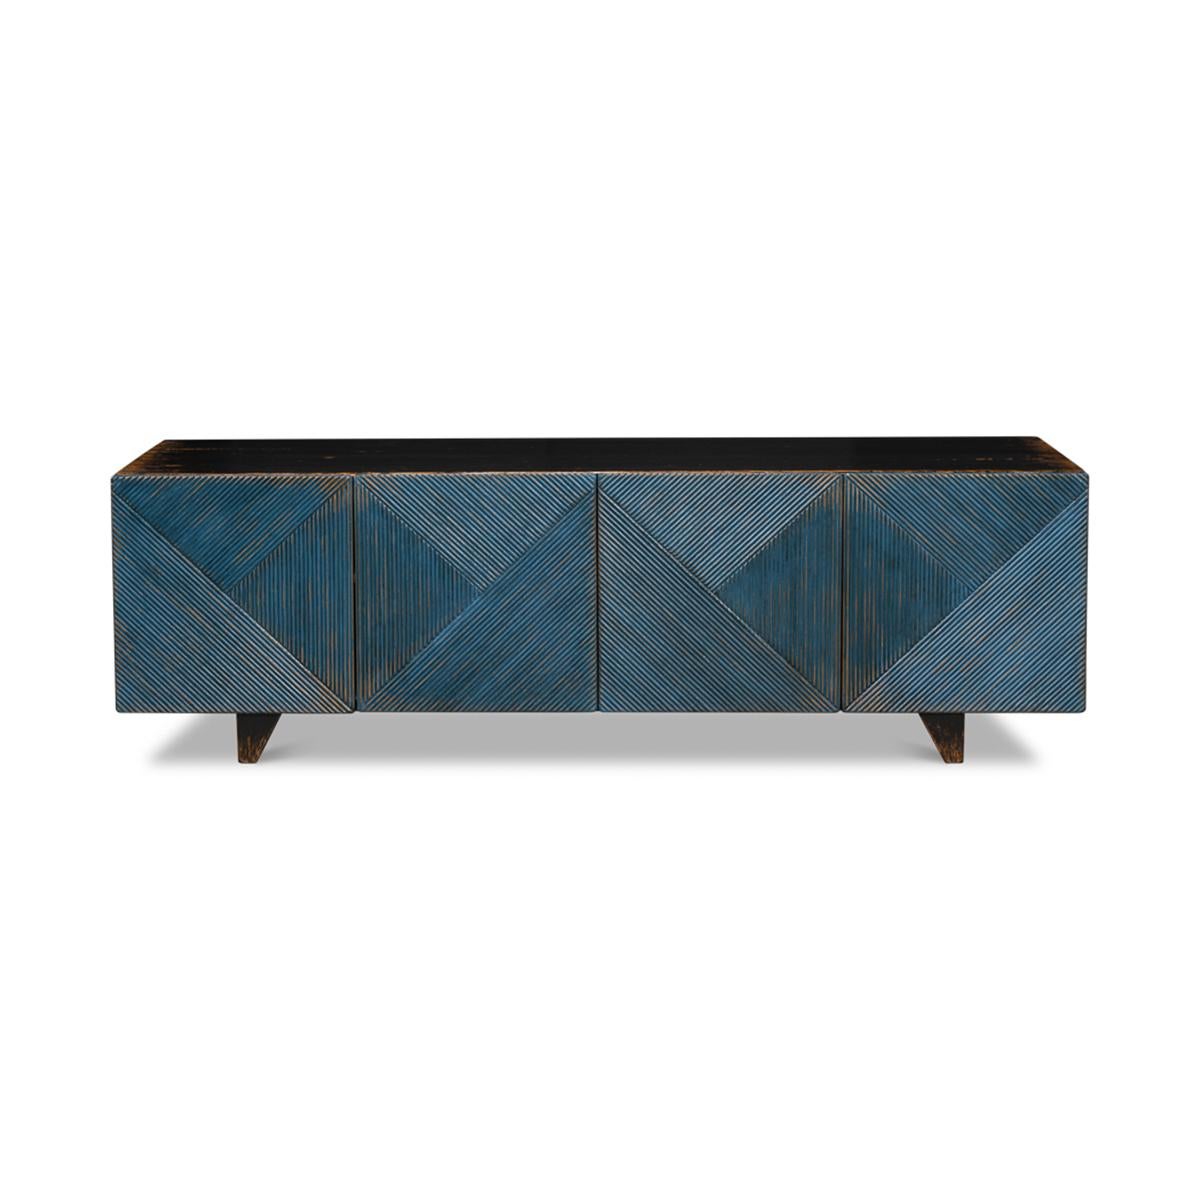 Modern rustic painted media cabinet, made with reclaimed pine in a dark blue wash finish. The door panels with reeded geometric designs, with a dark brown pine top and side. With an antiqued rustic painted finish. 

The painted interior with two